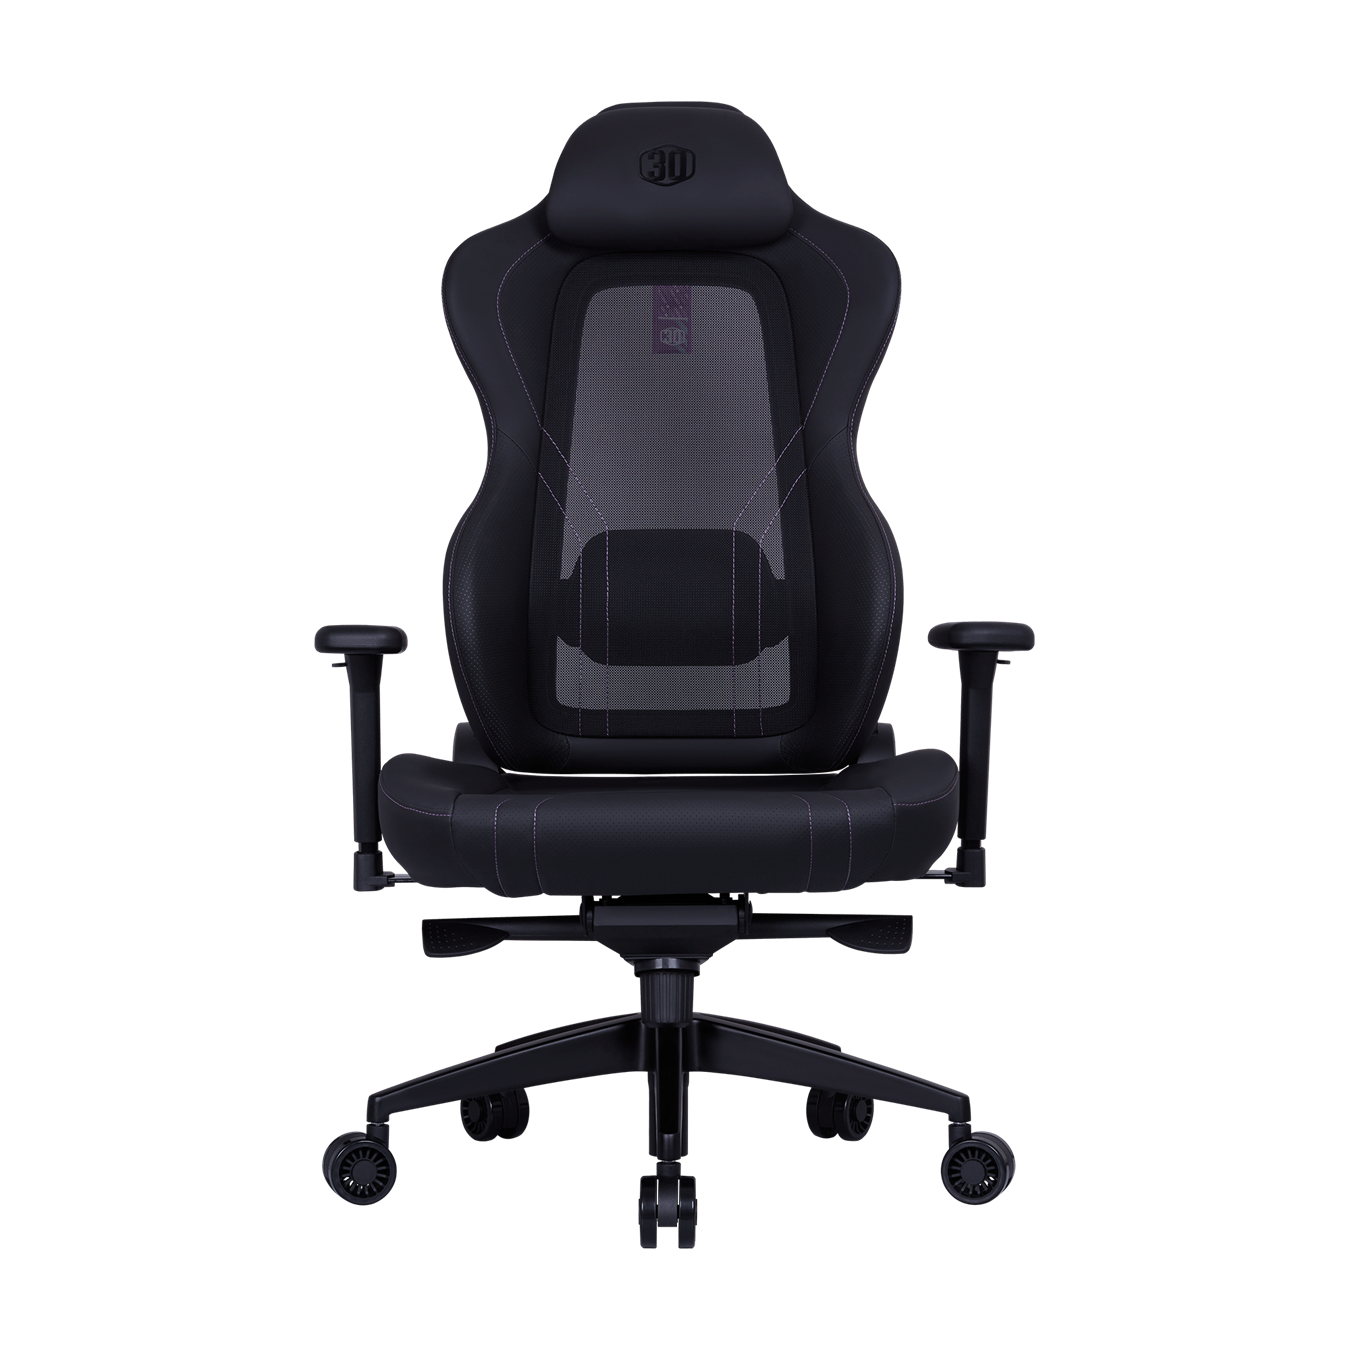 Hybrid 1 Ergo-Gaming Chair 30th Anniversary Edition - Normal Front View